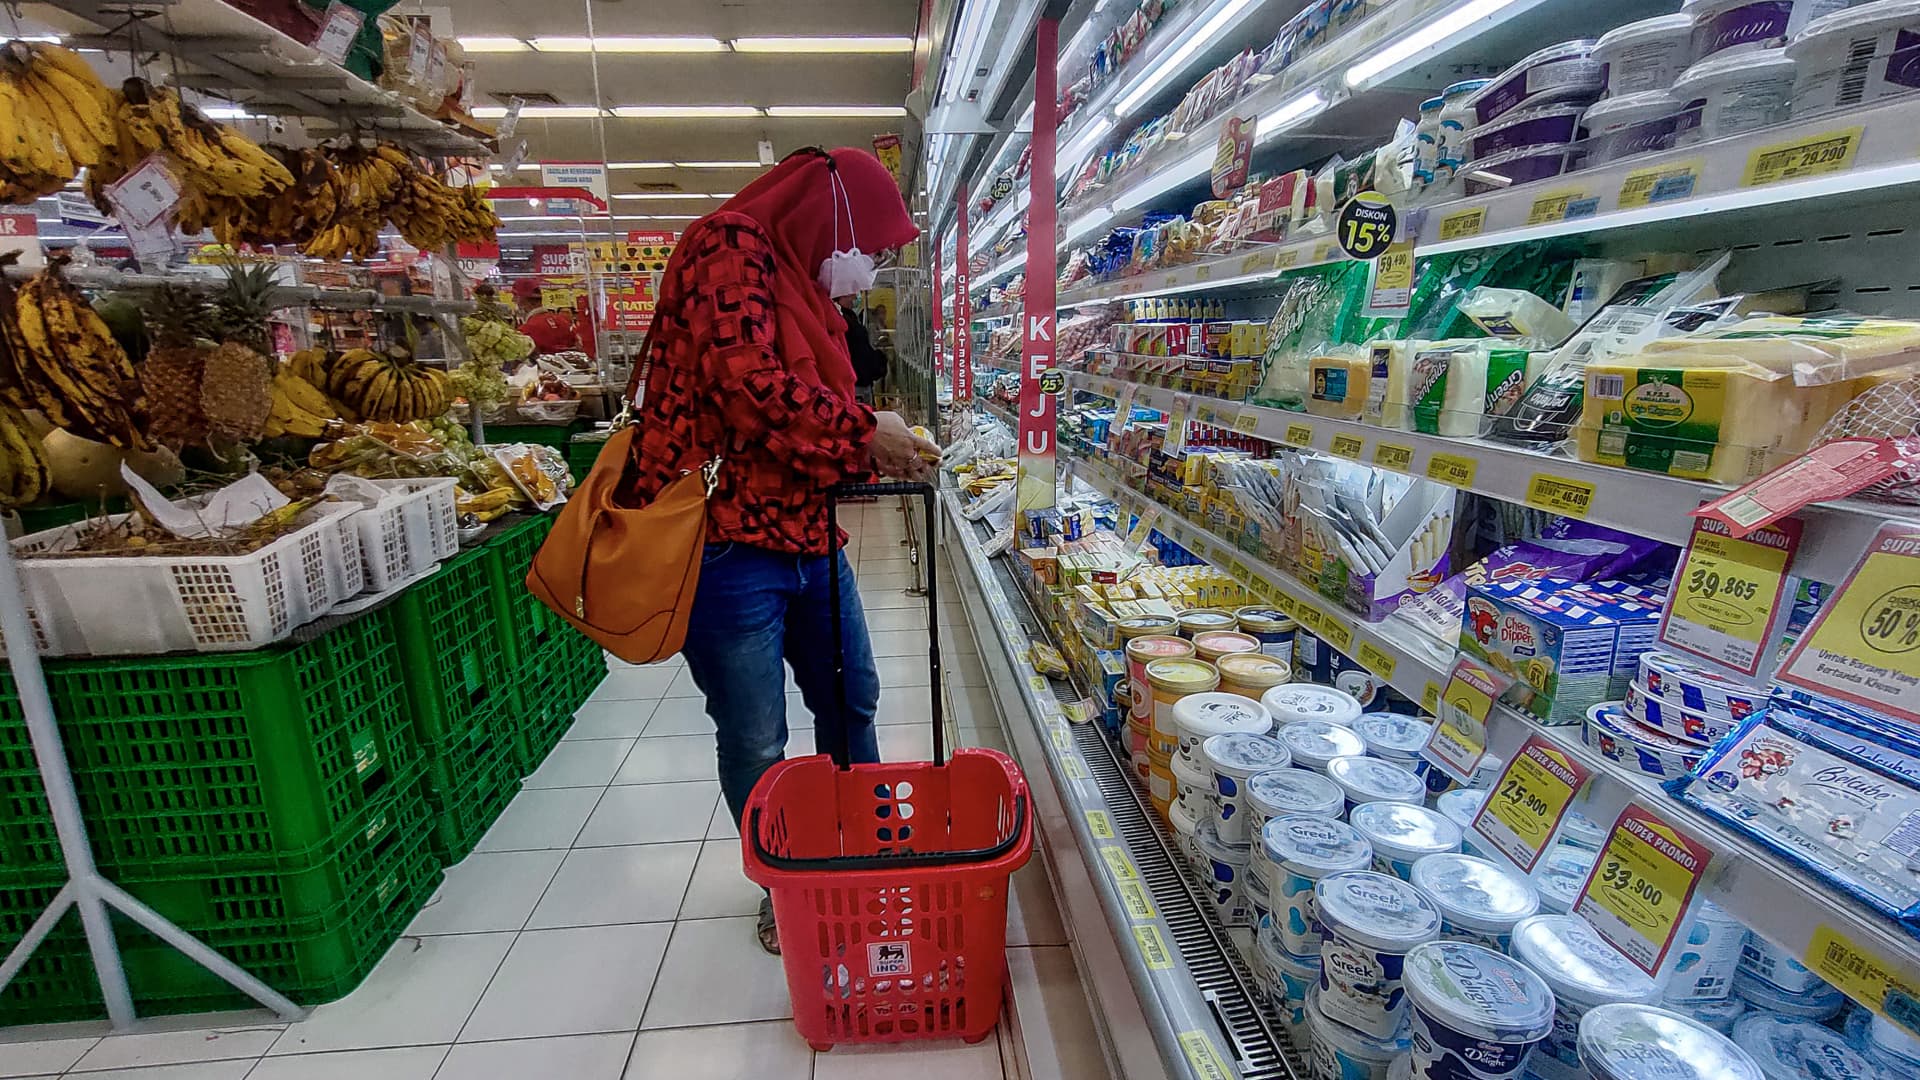 ‘Big risk’ of unrest in ASEAN if food inflation surges, says economist